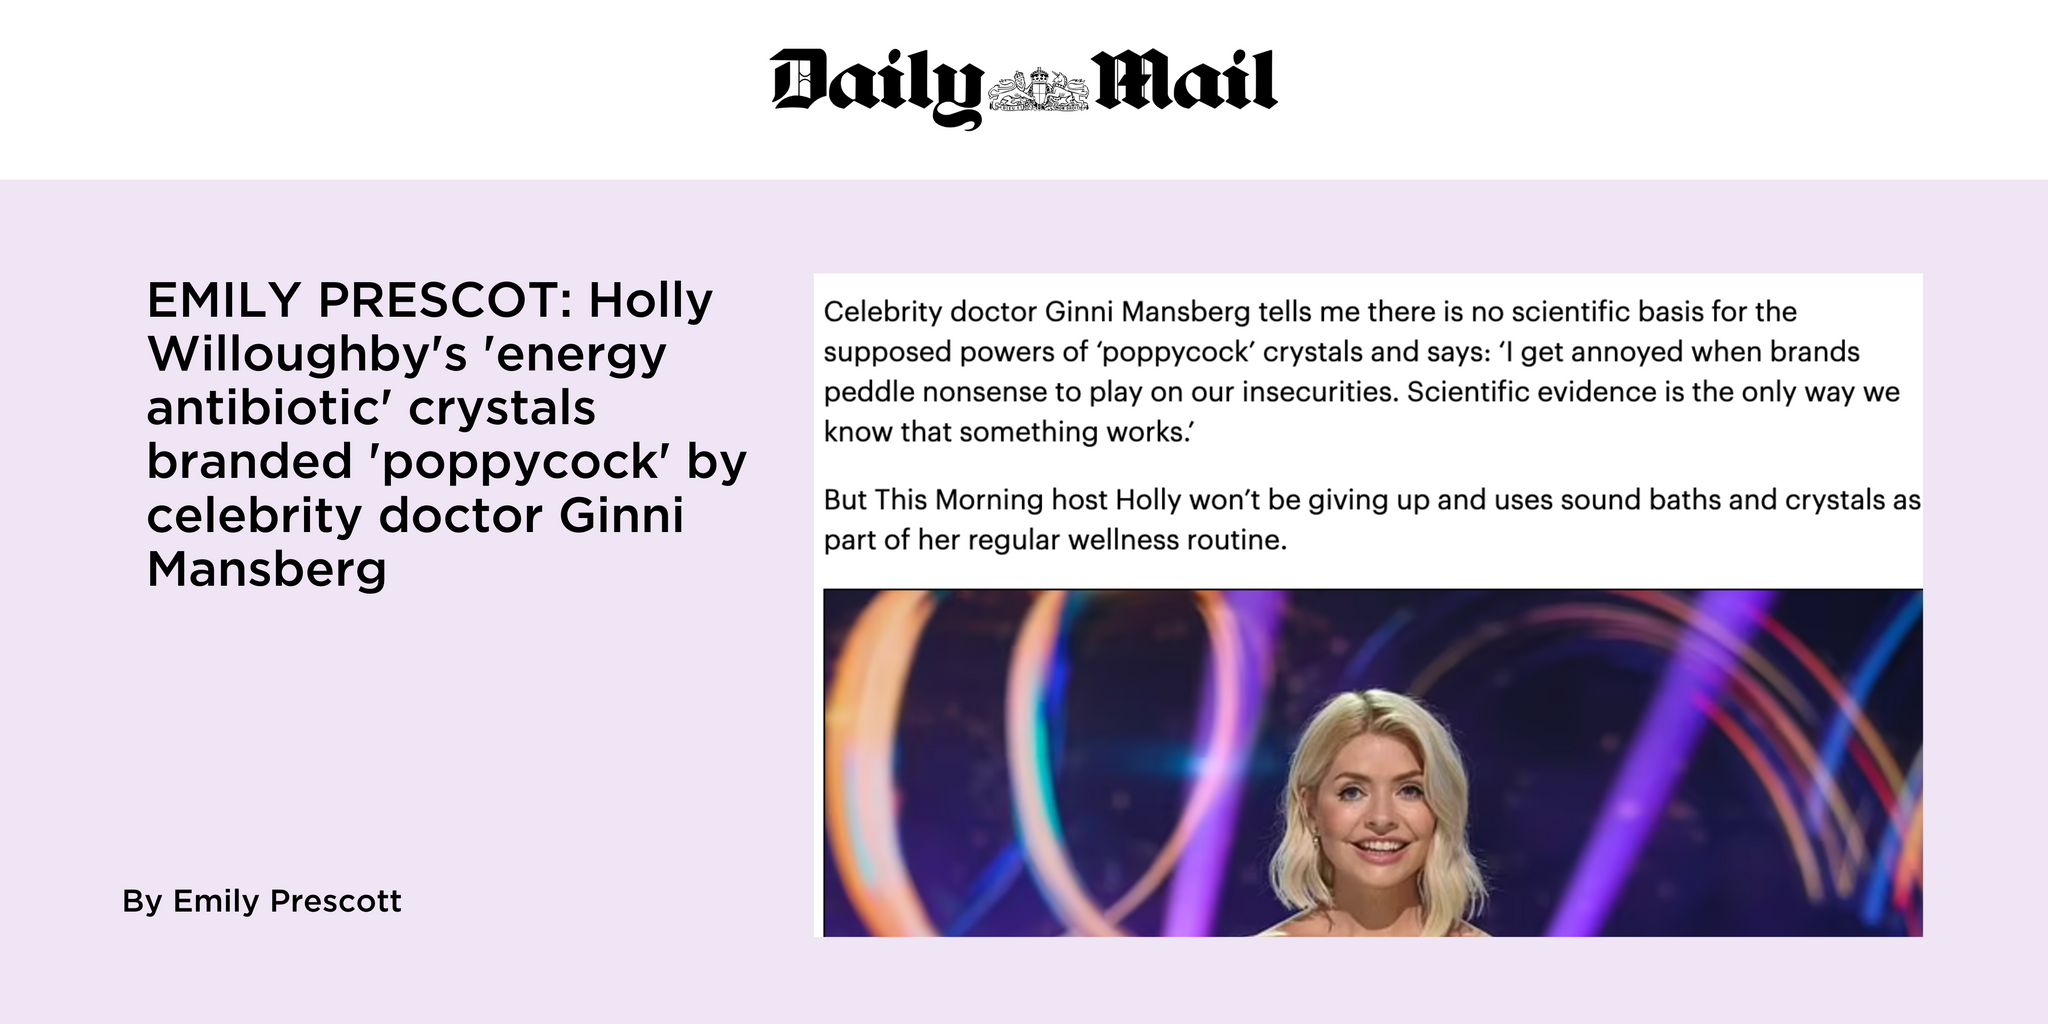 EMILY PRESCOT: Holly Willoughby's 'energy antibiotic' crystals branded 'poppycock' by celebrity doctor Ginni Mansberg